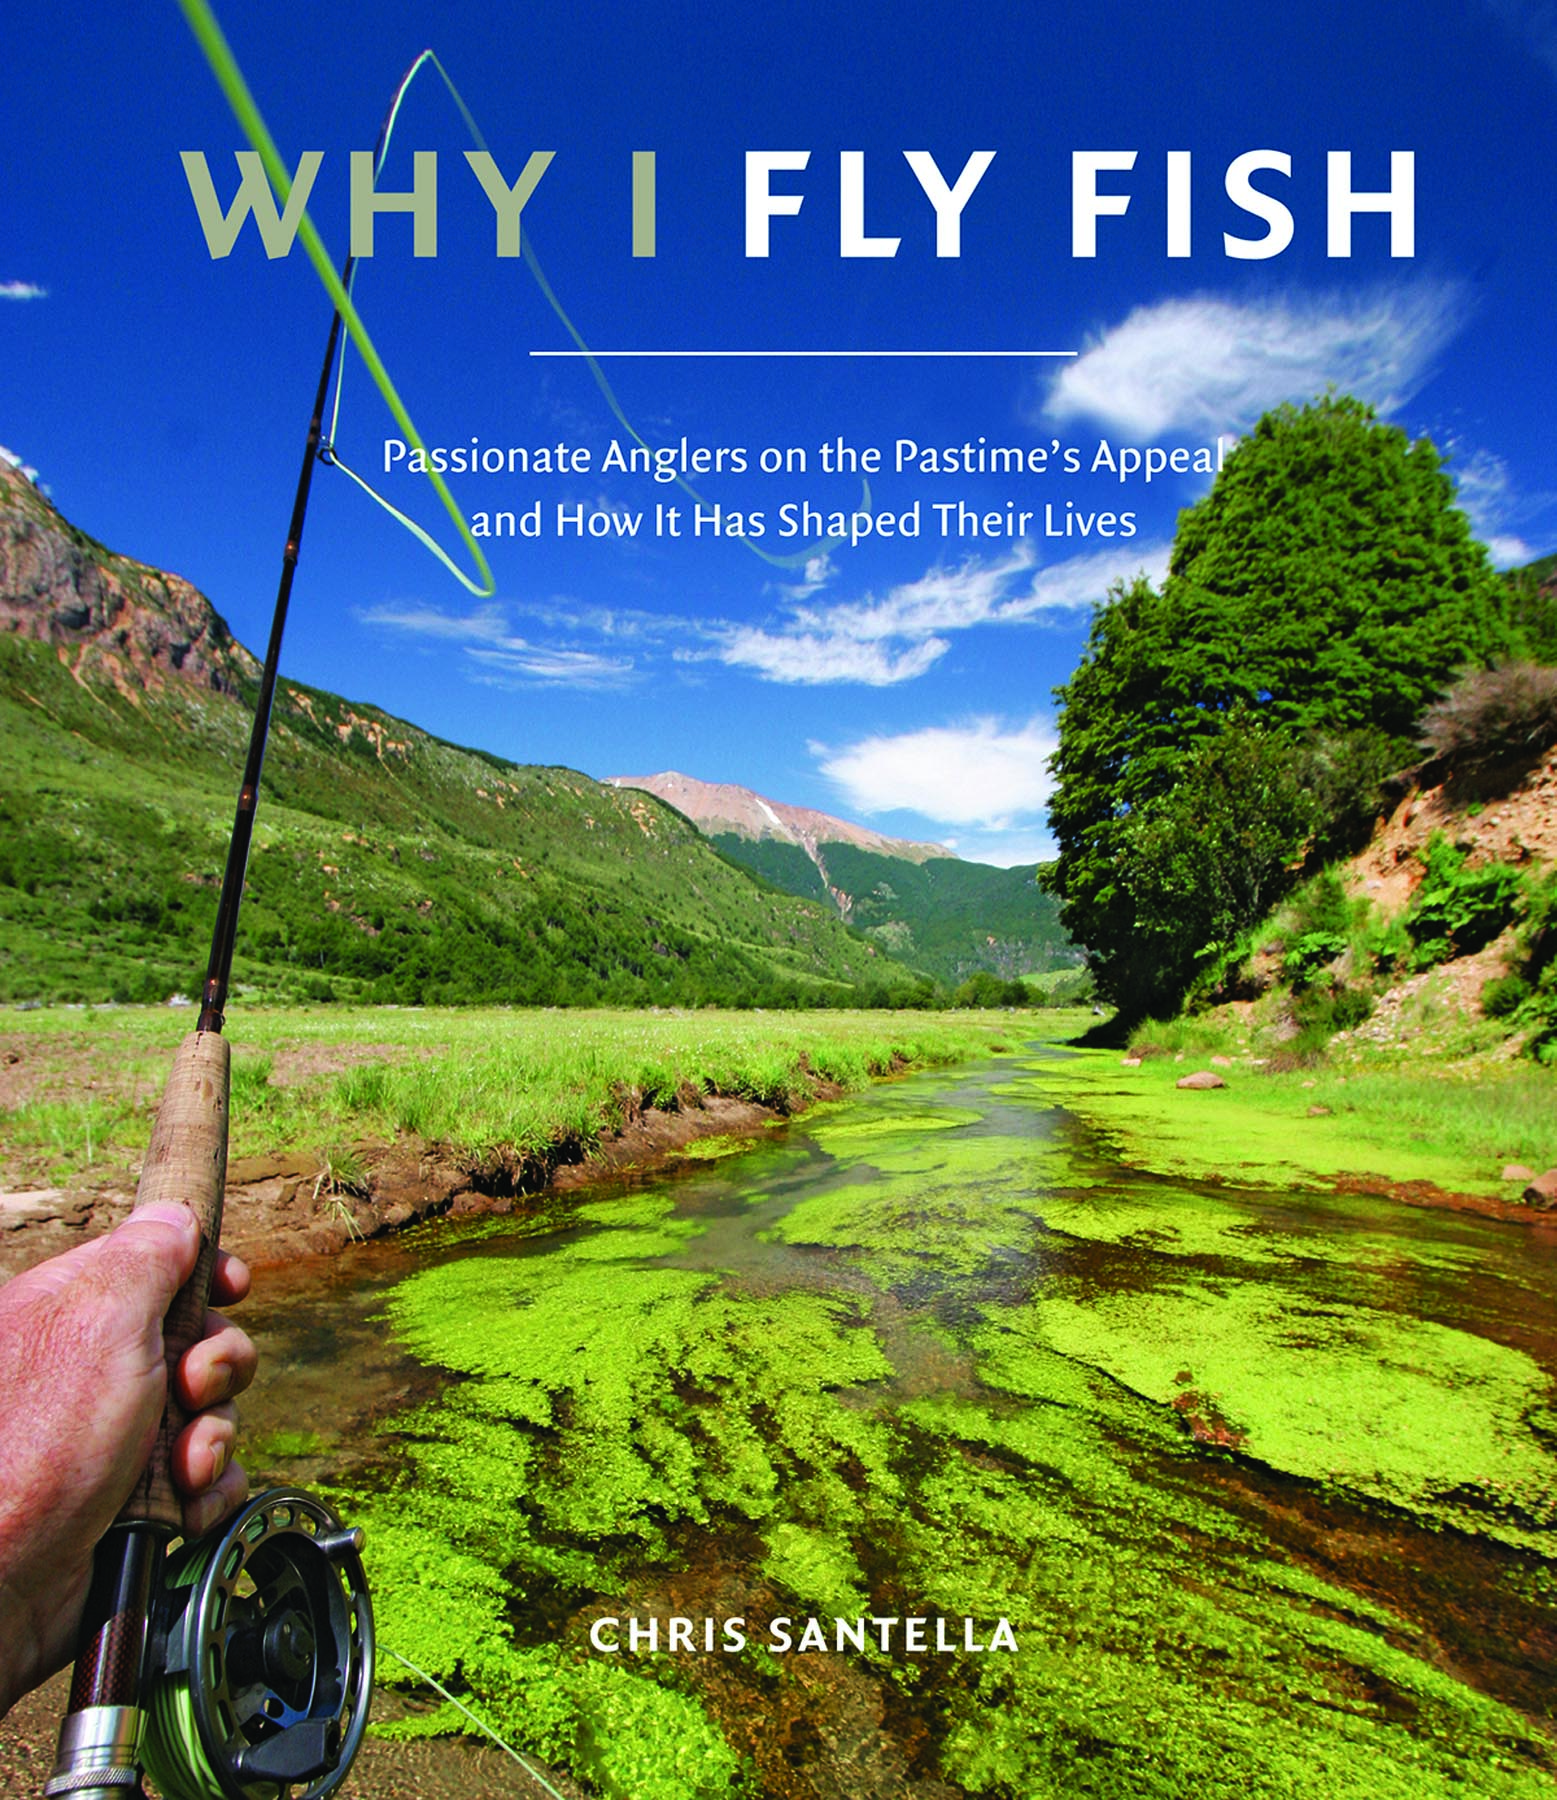 Books: Writing the West (Fly Fishing 2014) - Big Sky Journal